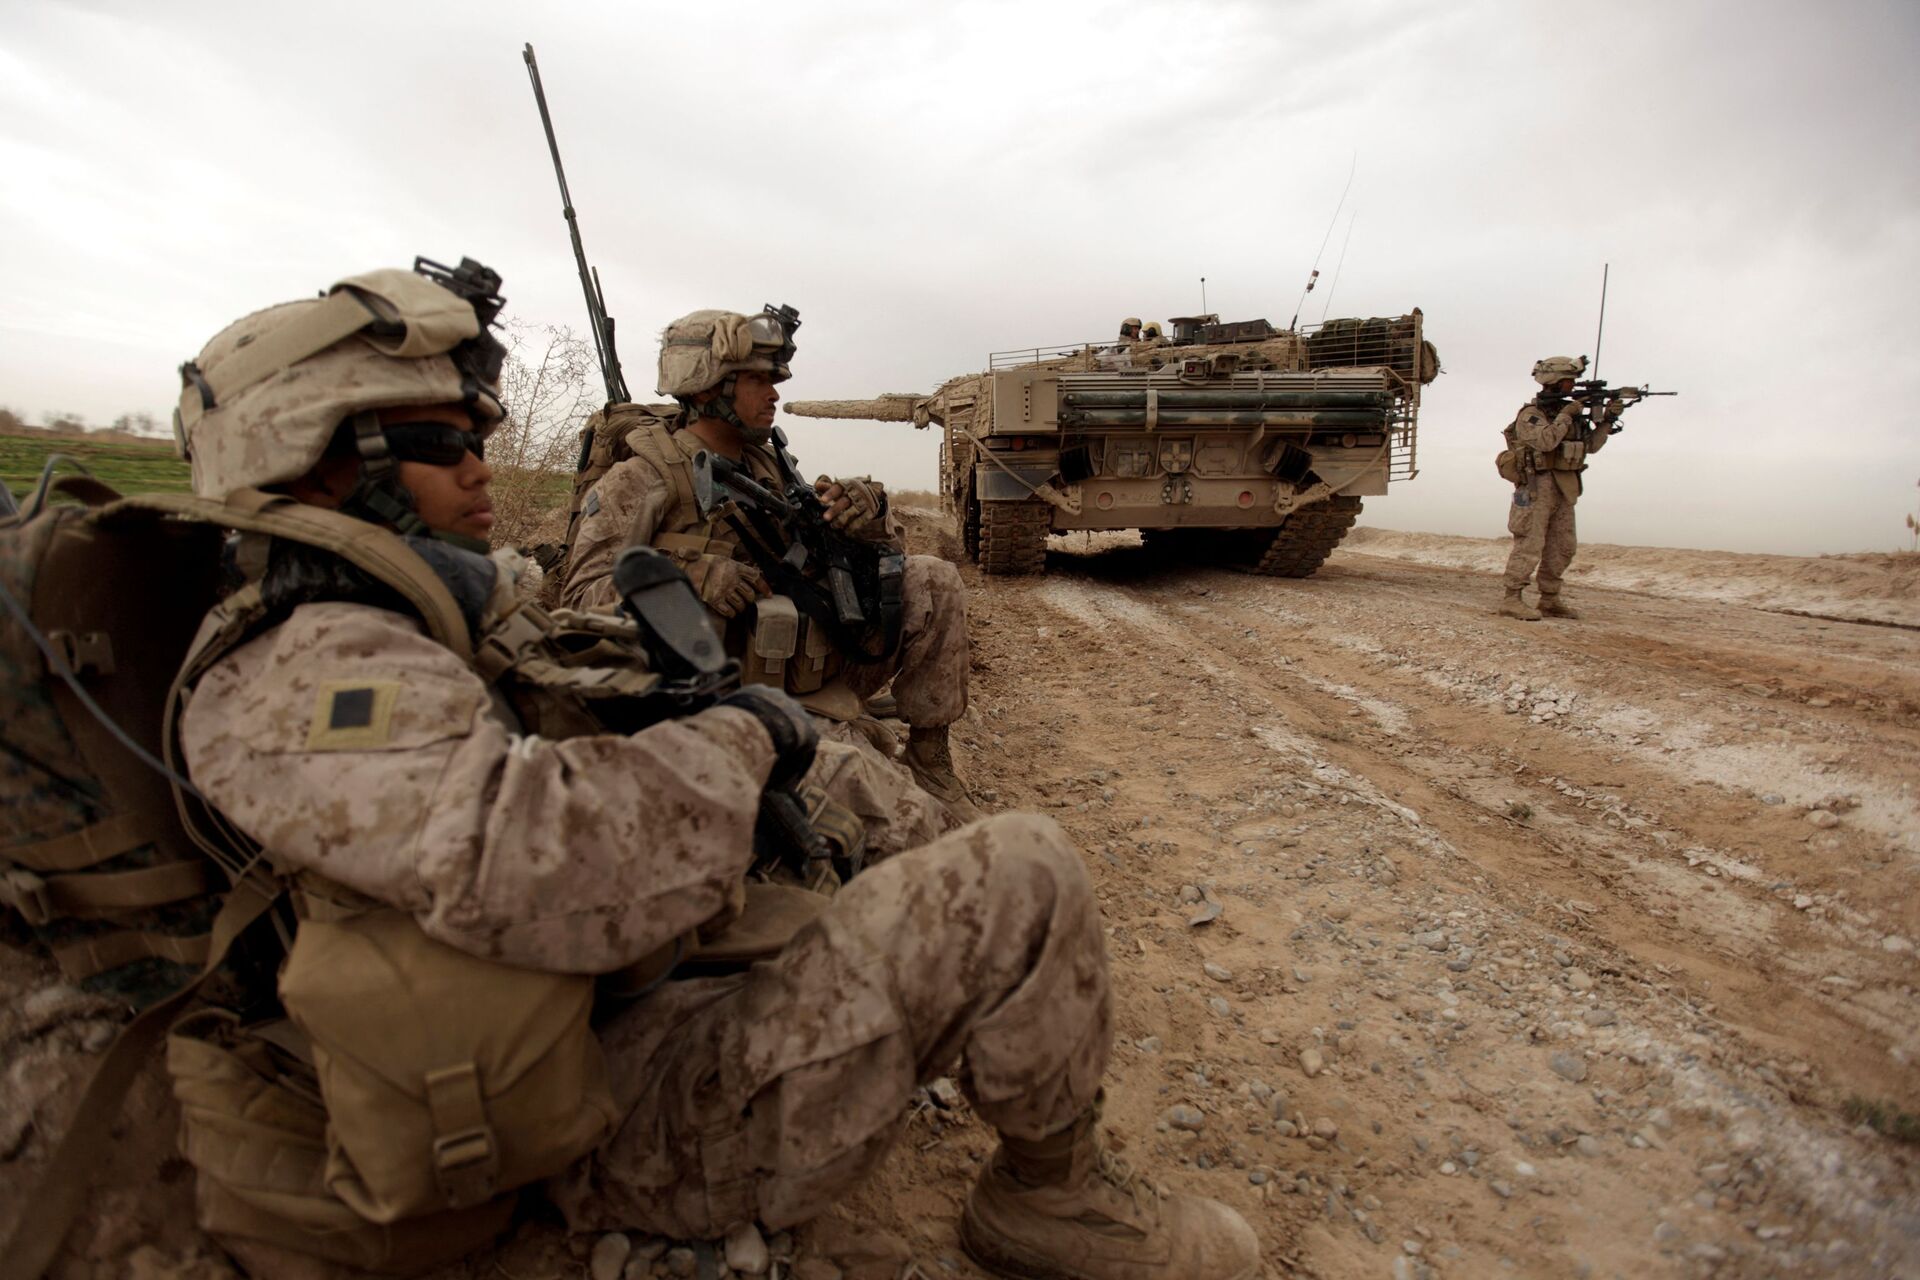 Afghanistan No Longer Priority for West, So US Troops to Exit Despite Violence Reports, Analysts Say - Sputnik International, 1920, 25.06.2021